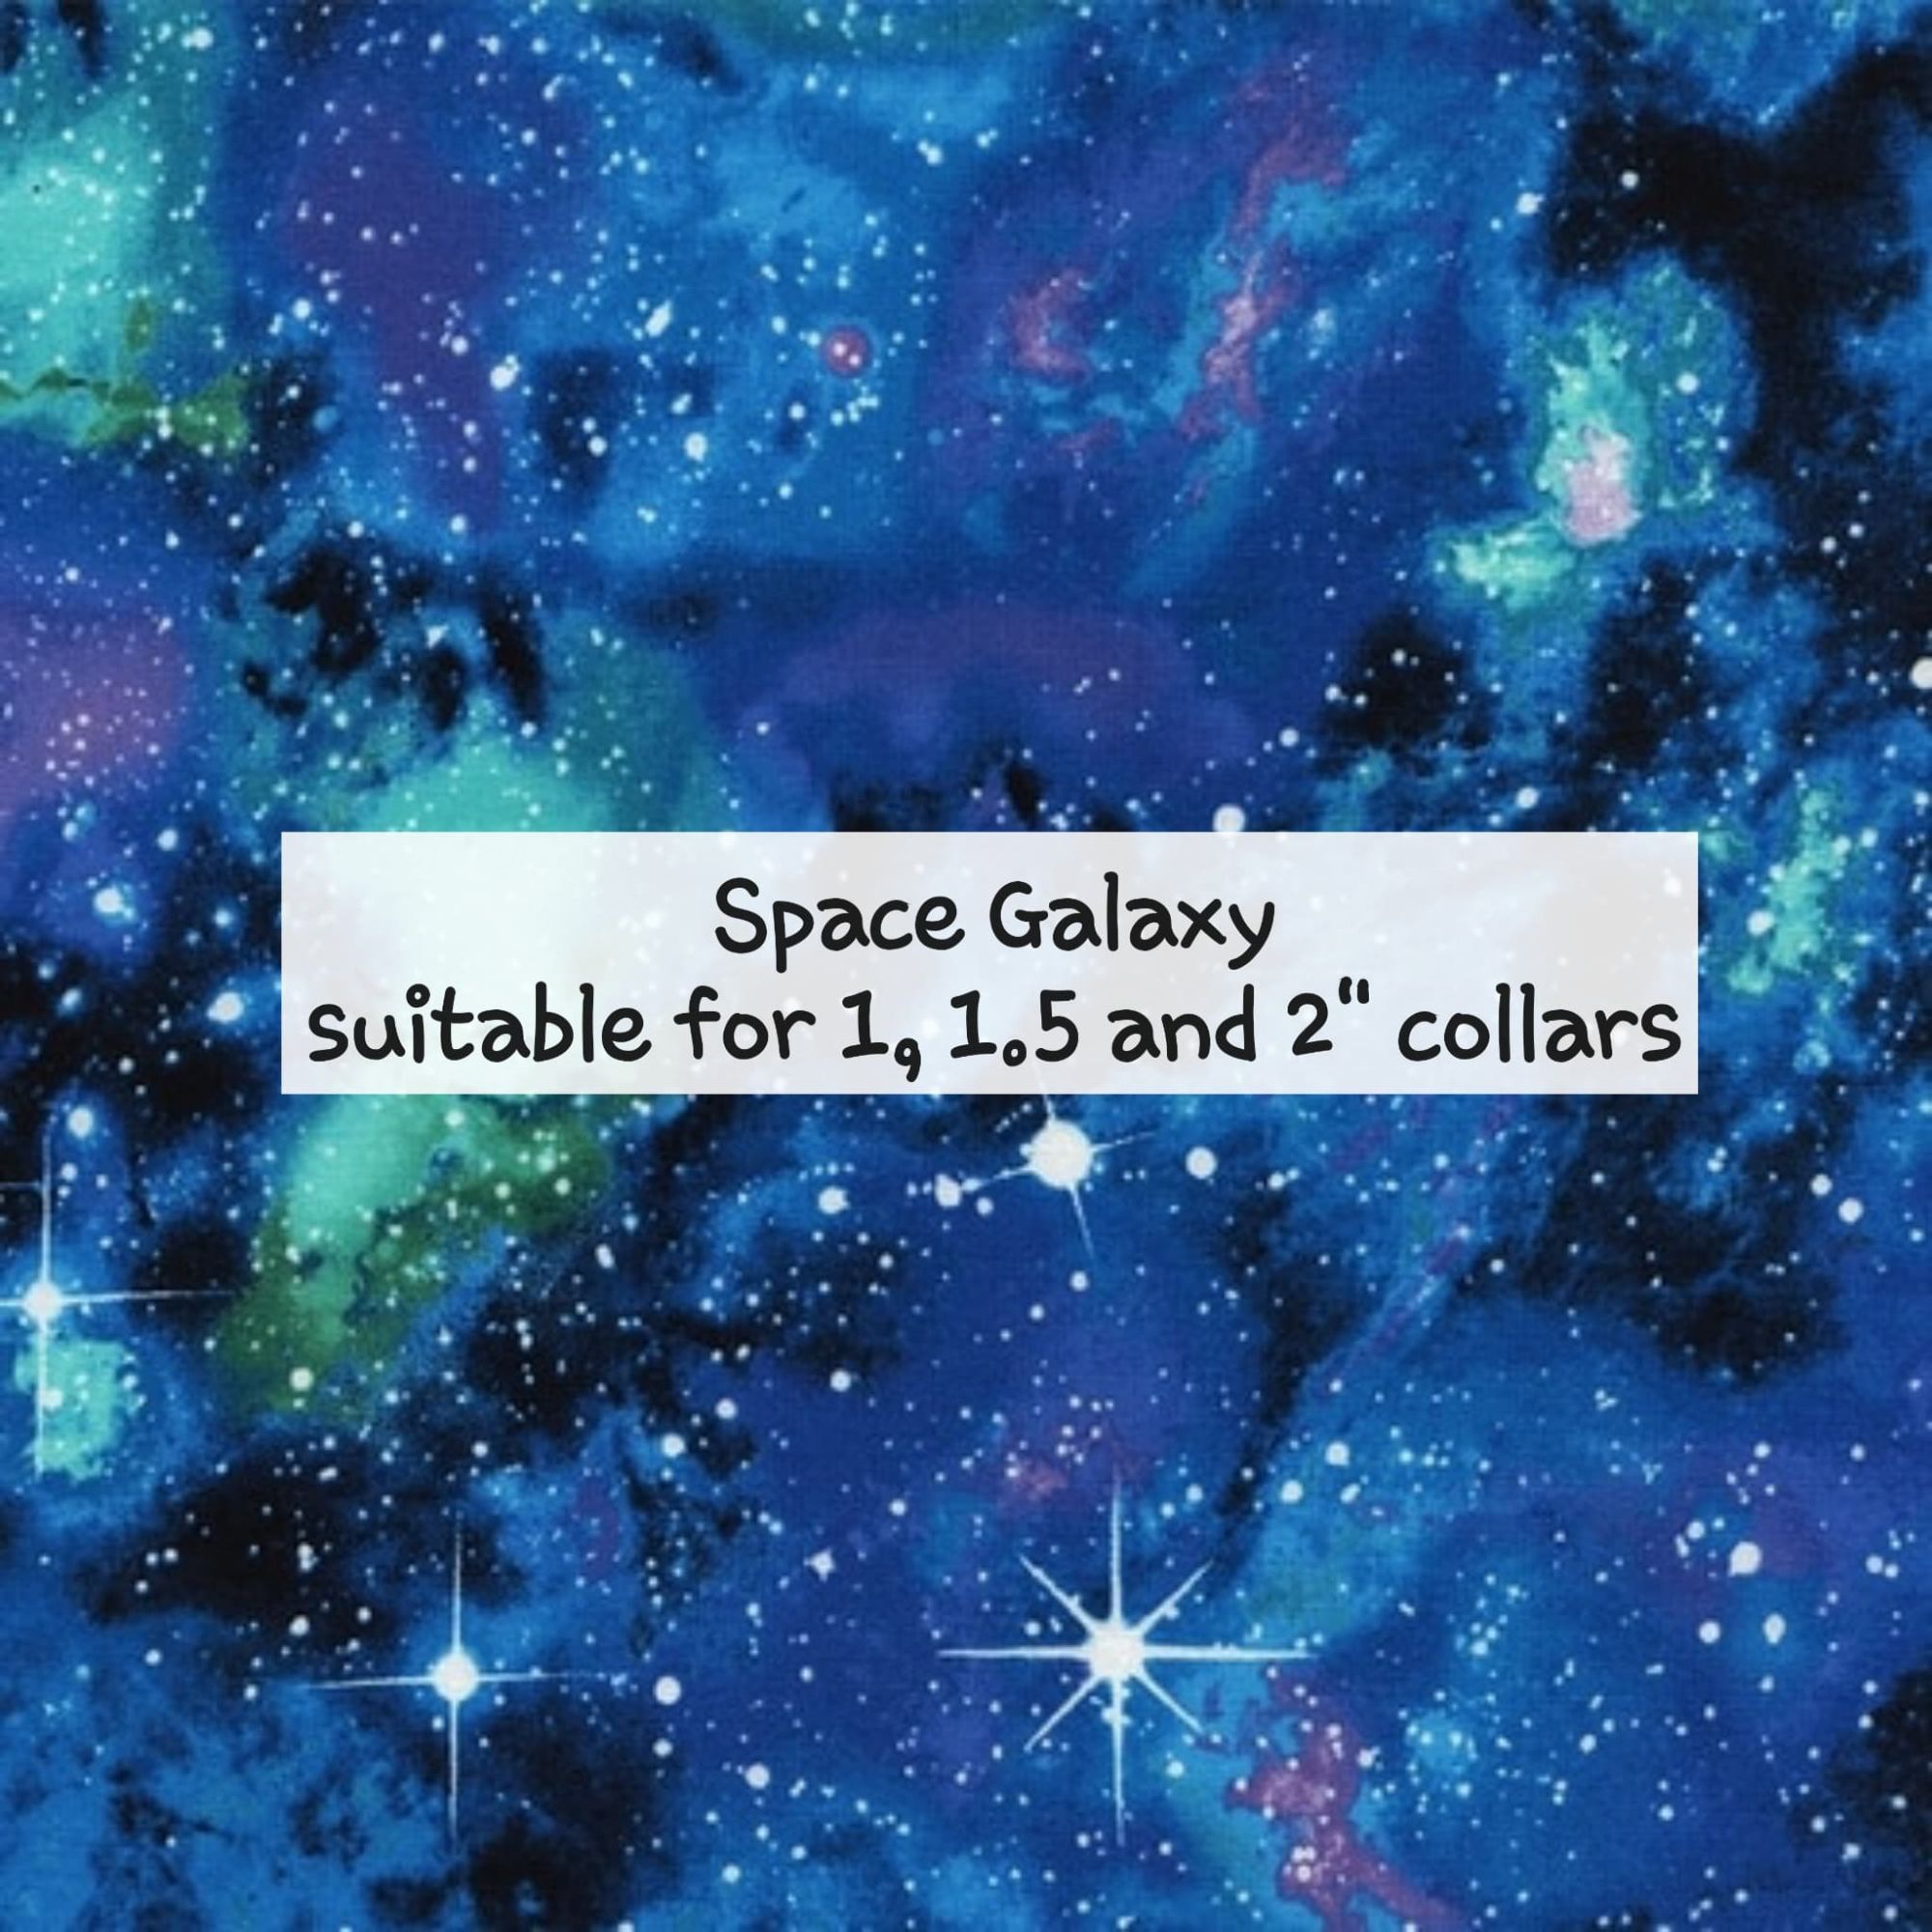 Space Galaxy - Suitable for 1, 1.5 and 2 inch collars